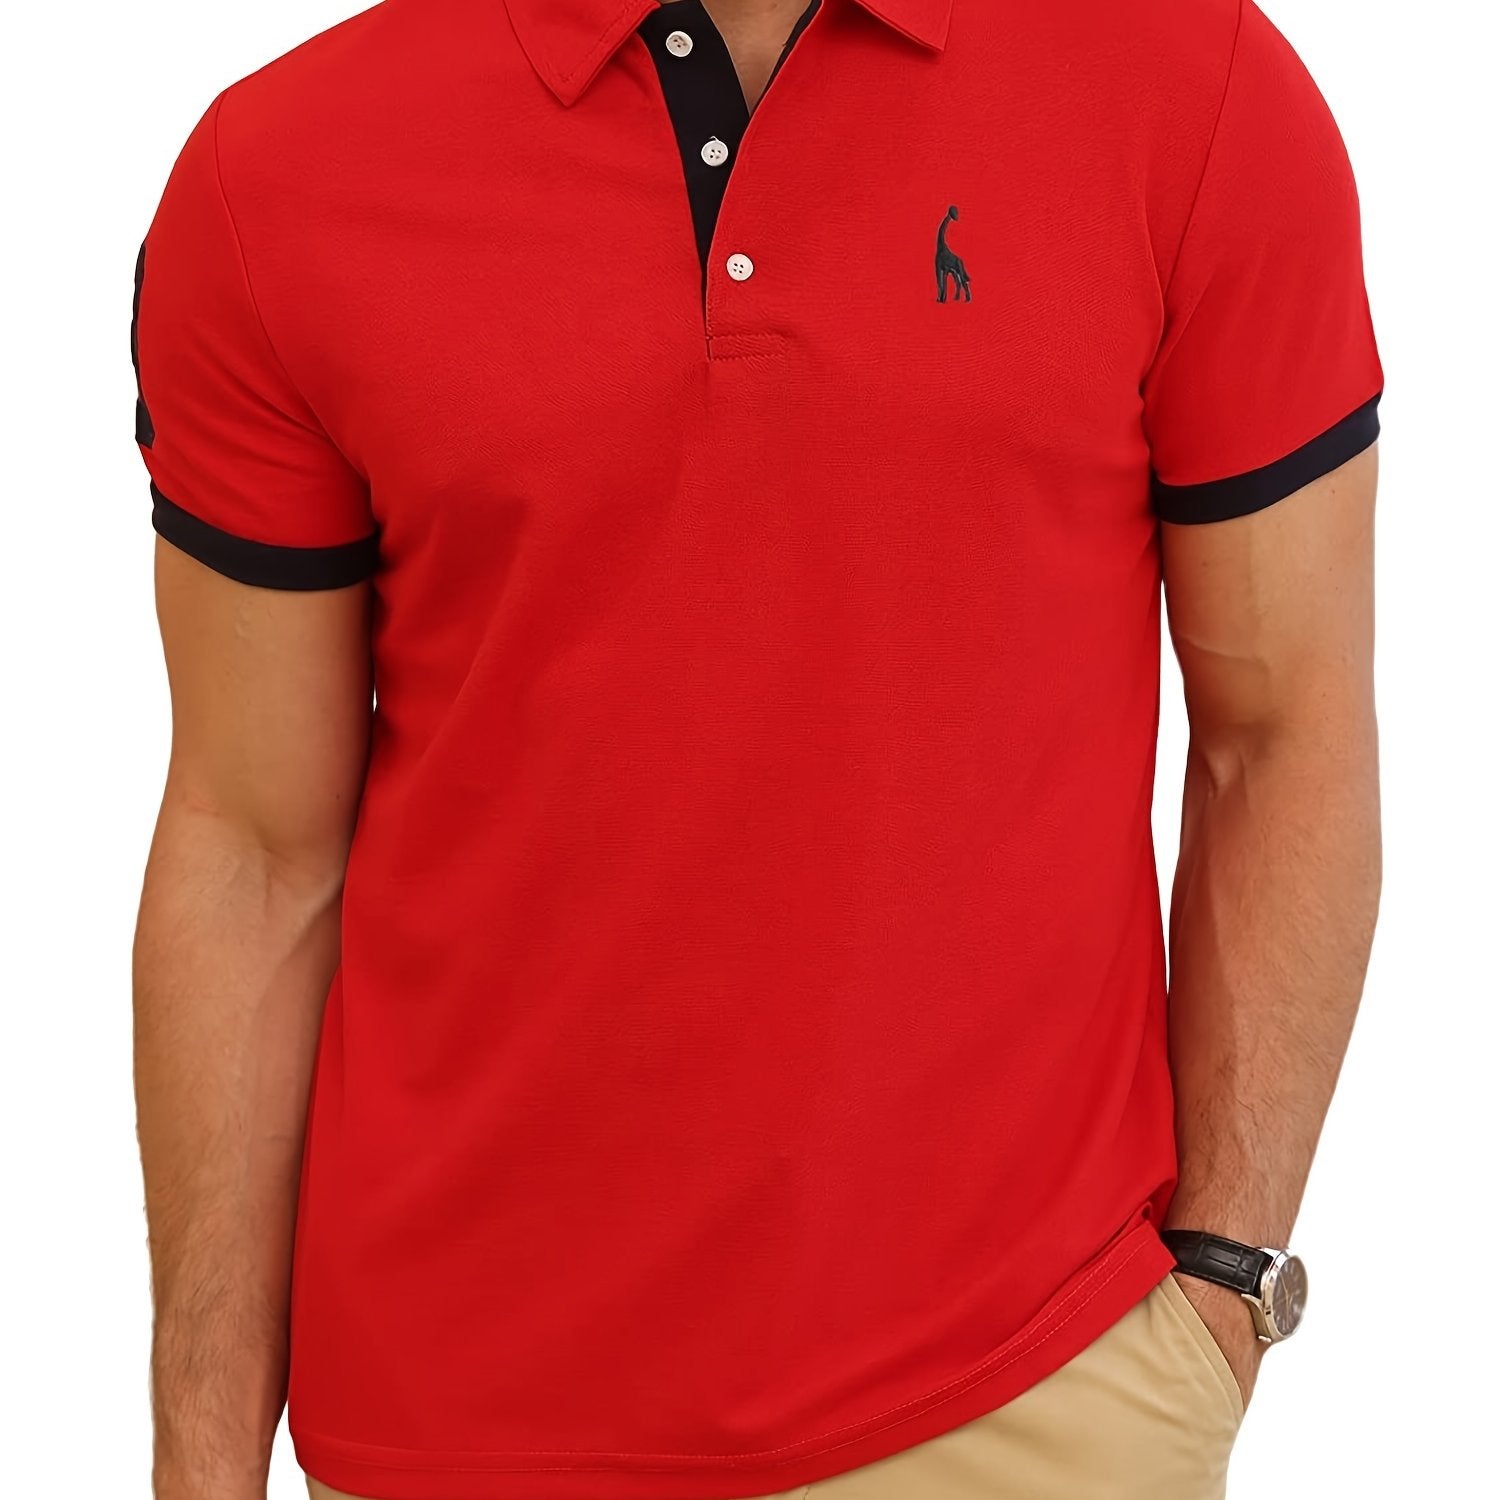 「lovevop」Men's Casual Slim Fit Embroidered Striped Polo Shirt